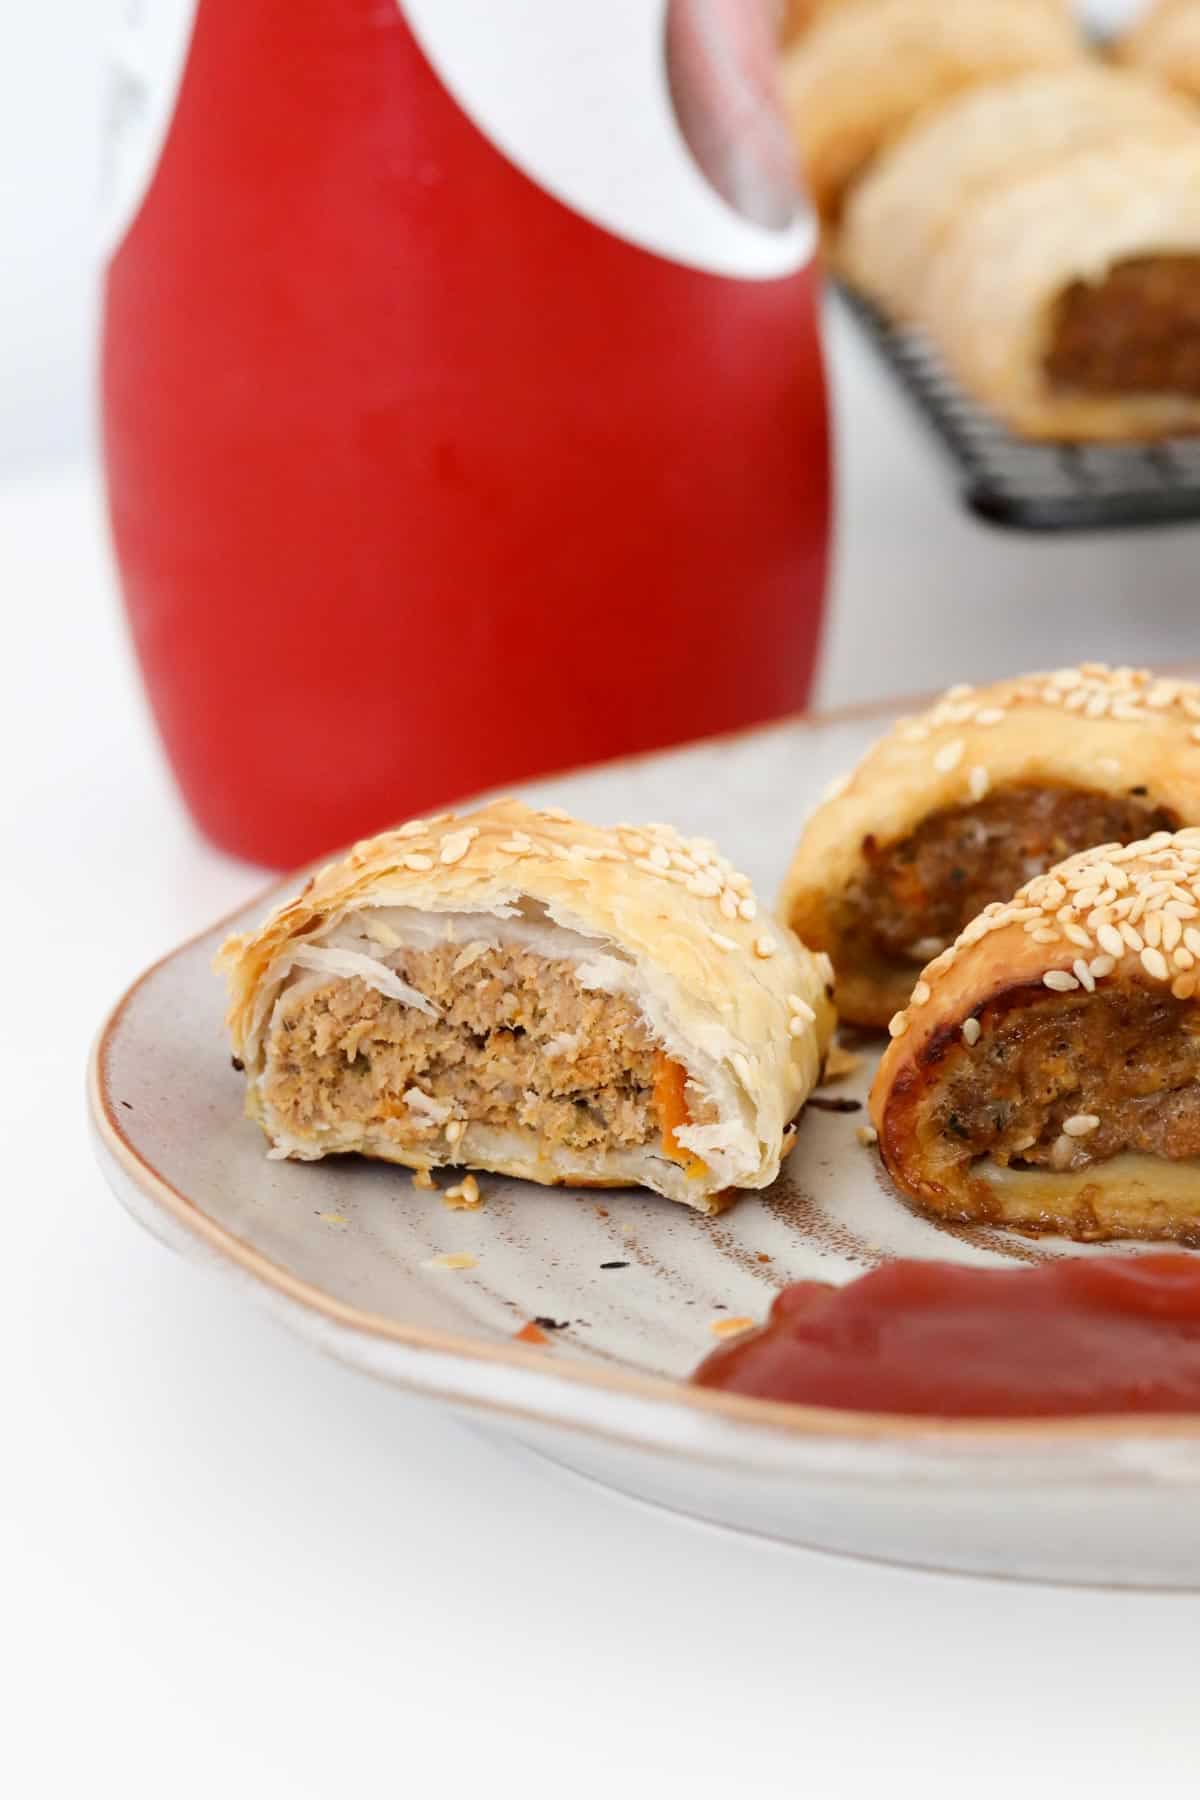 Beef pastry rolls on a plate with tomato sauce